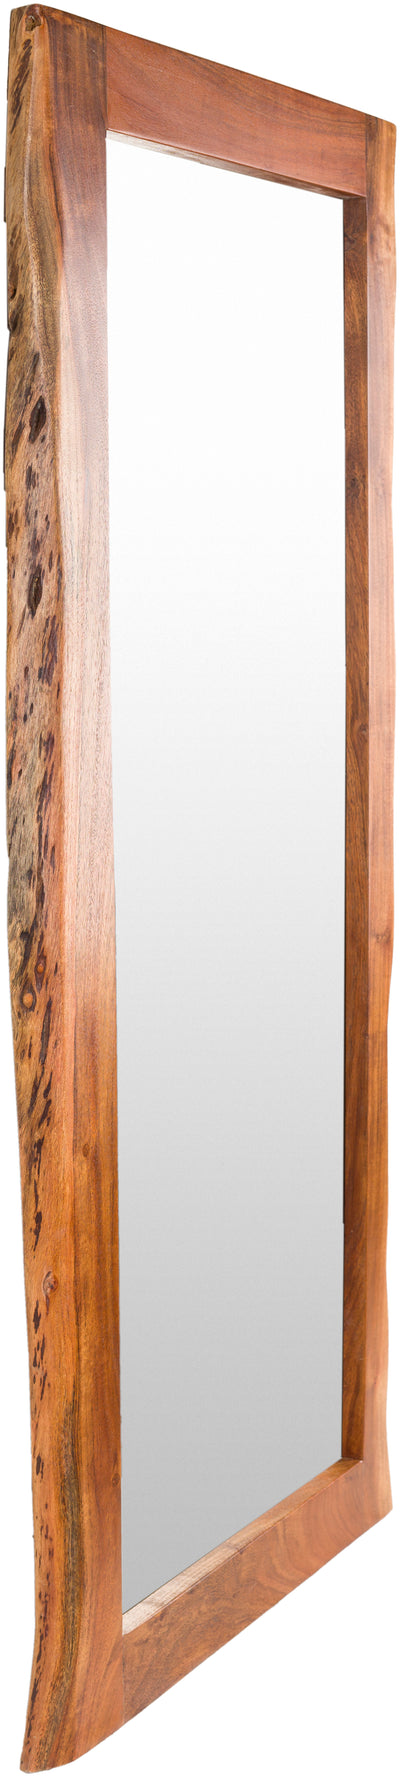 product image for Edge DGE-101 Tall Rectangular Mirror by Surya 99